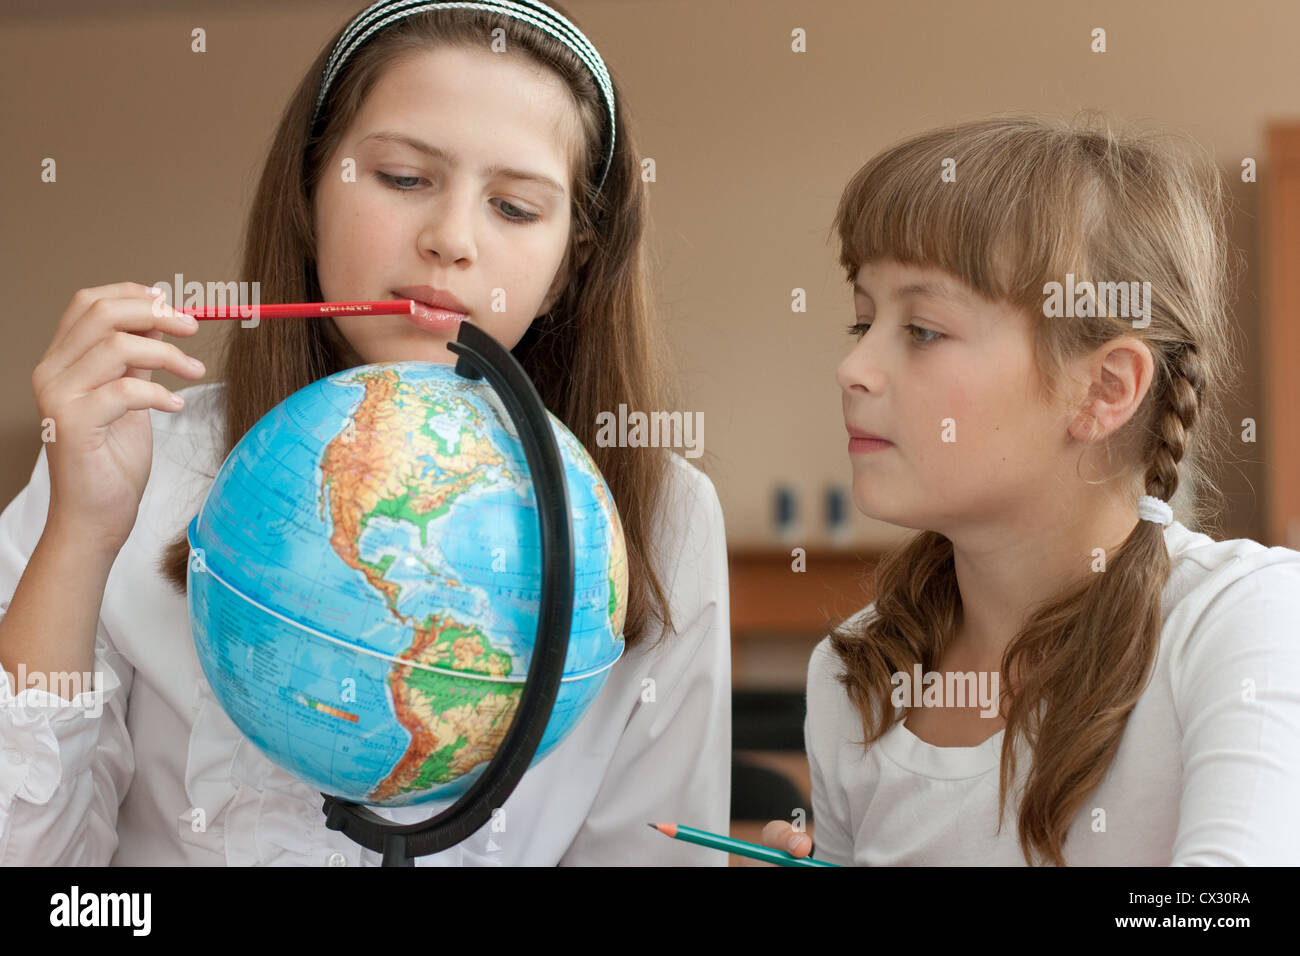 Two schoolgirls search geographical location using globe Stock Photo